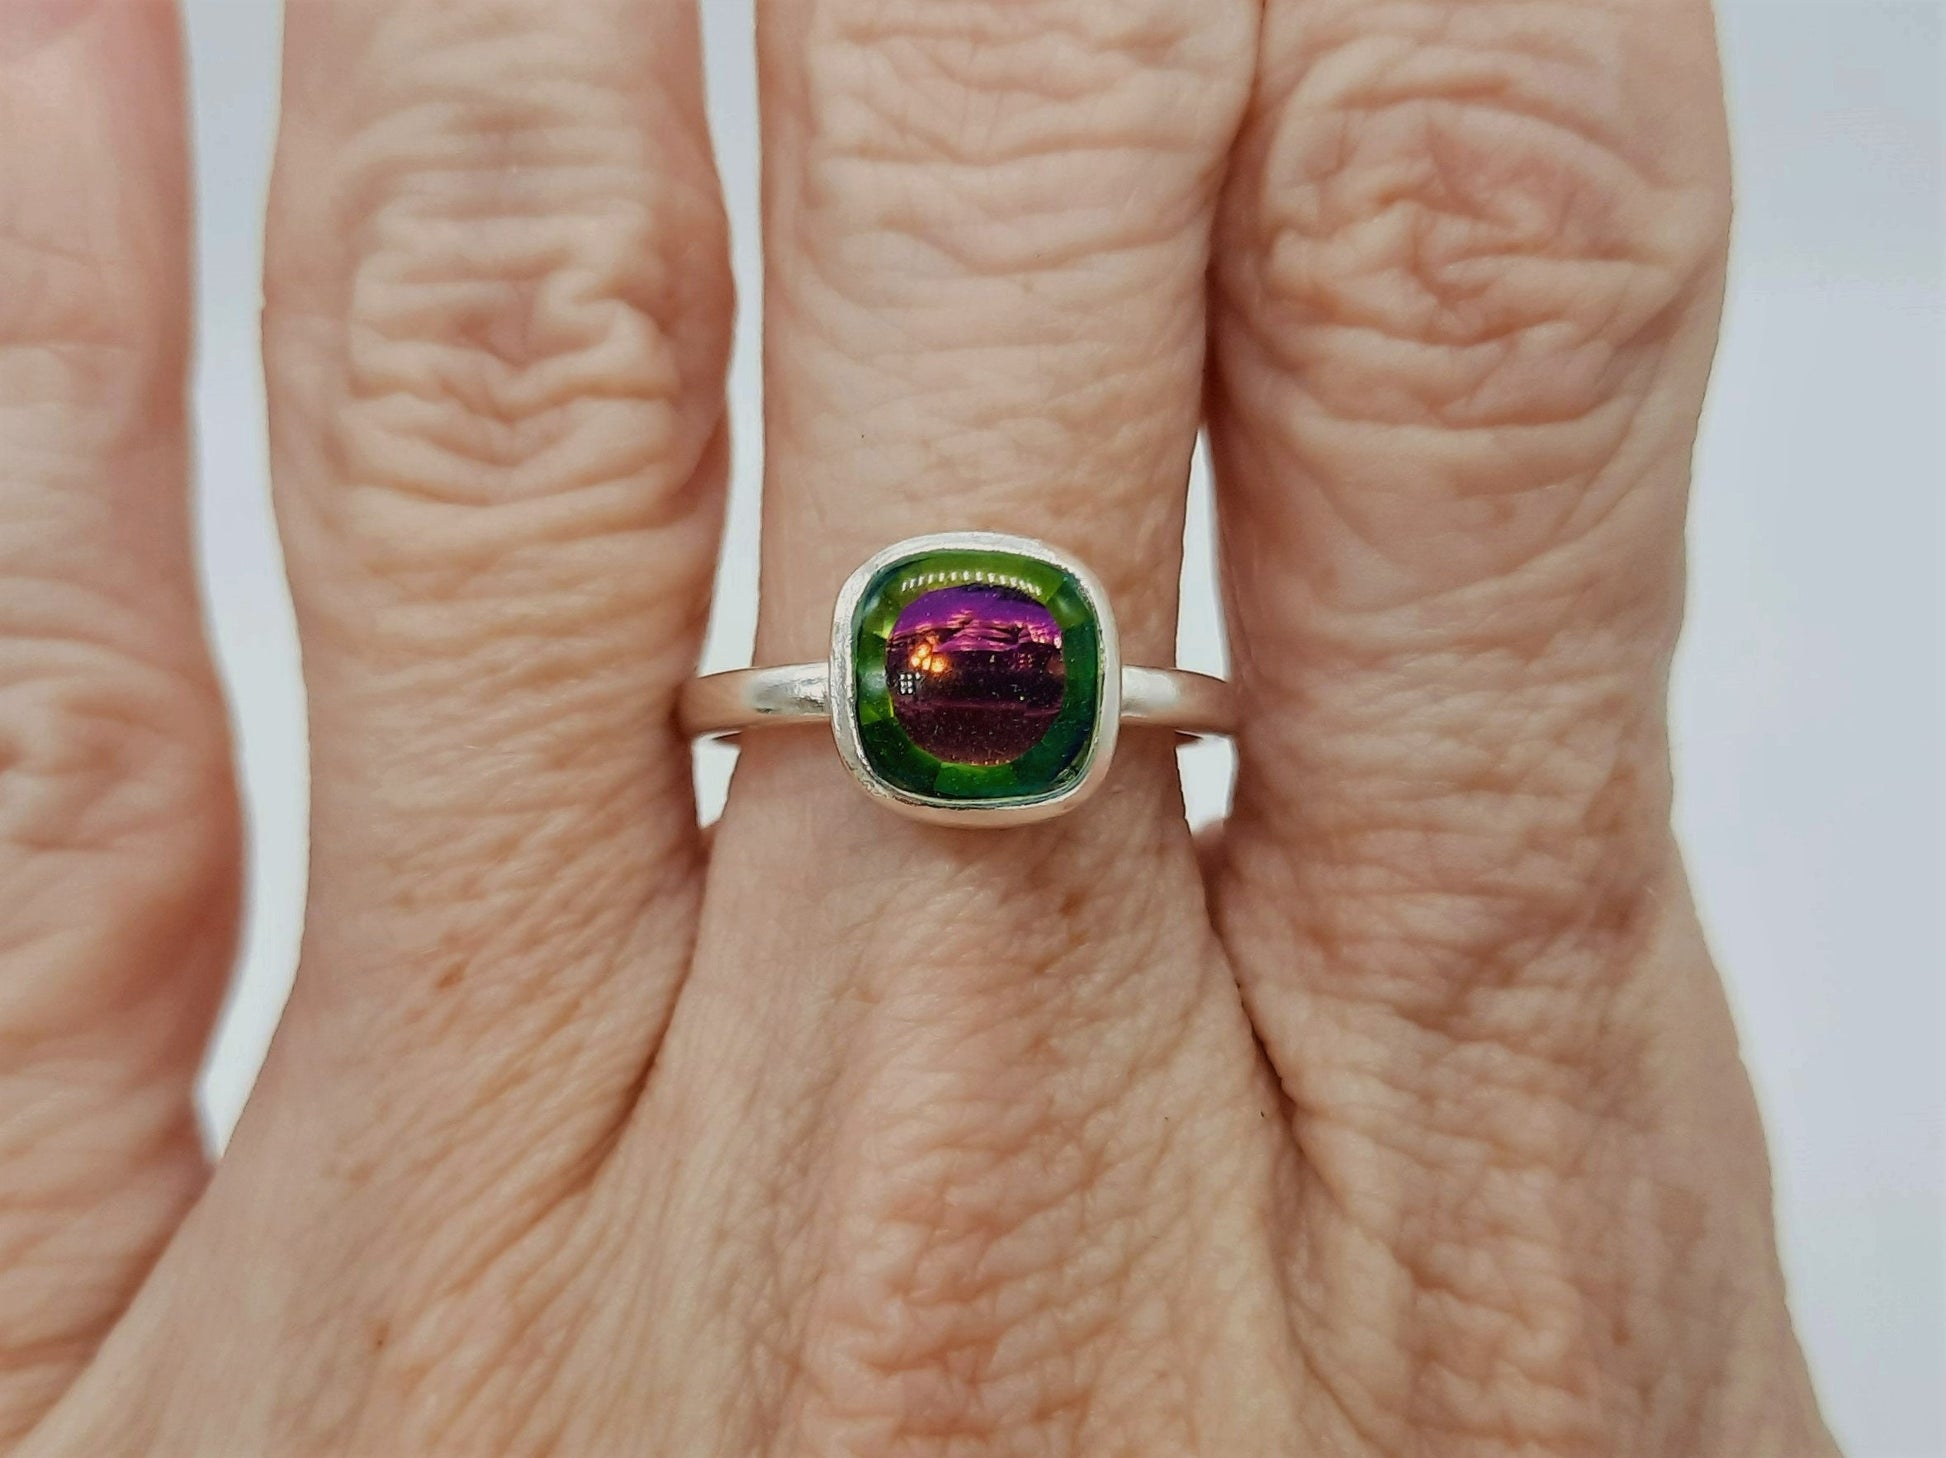 Handcrafted Square Design 925 Sterling Silver Iridescent Multifaceted Purple and Green Aurora Borealis Ring, Domed with Mica Infused Resin